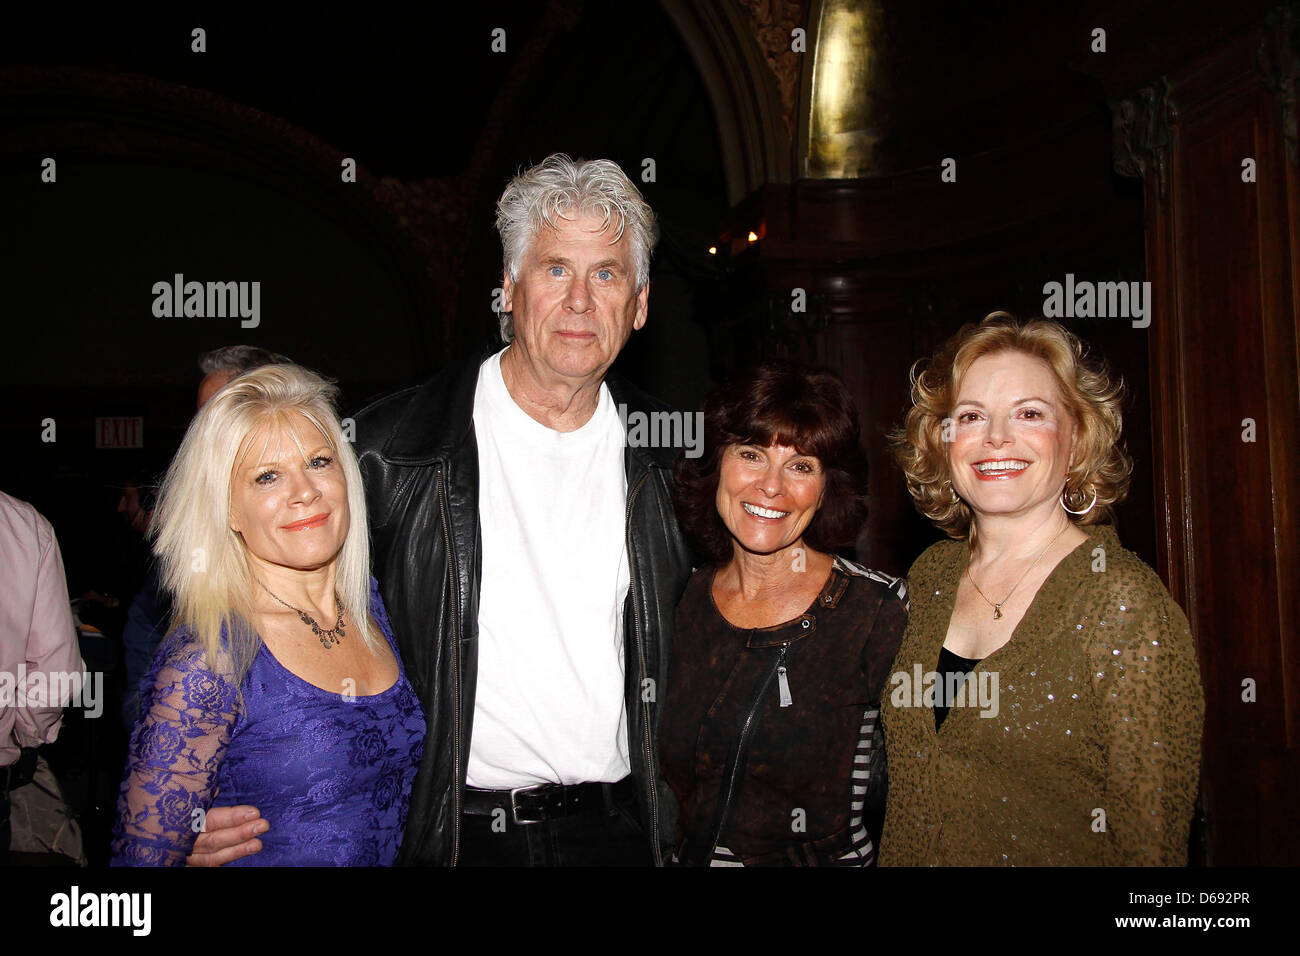 Ilene Kristen, Barry Bostwick, Adrienne Barbeau and Carole Demas Meet and greet with the Original Broadway Cast of 'Grease' Stock Photo